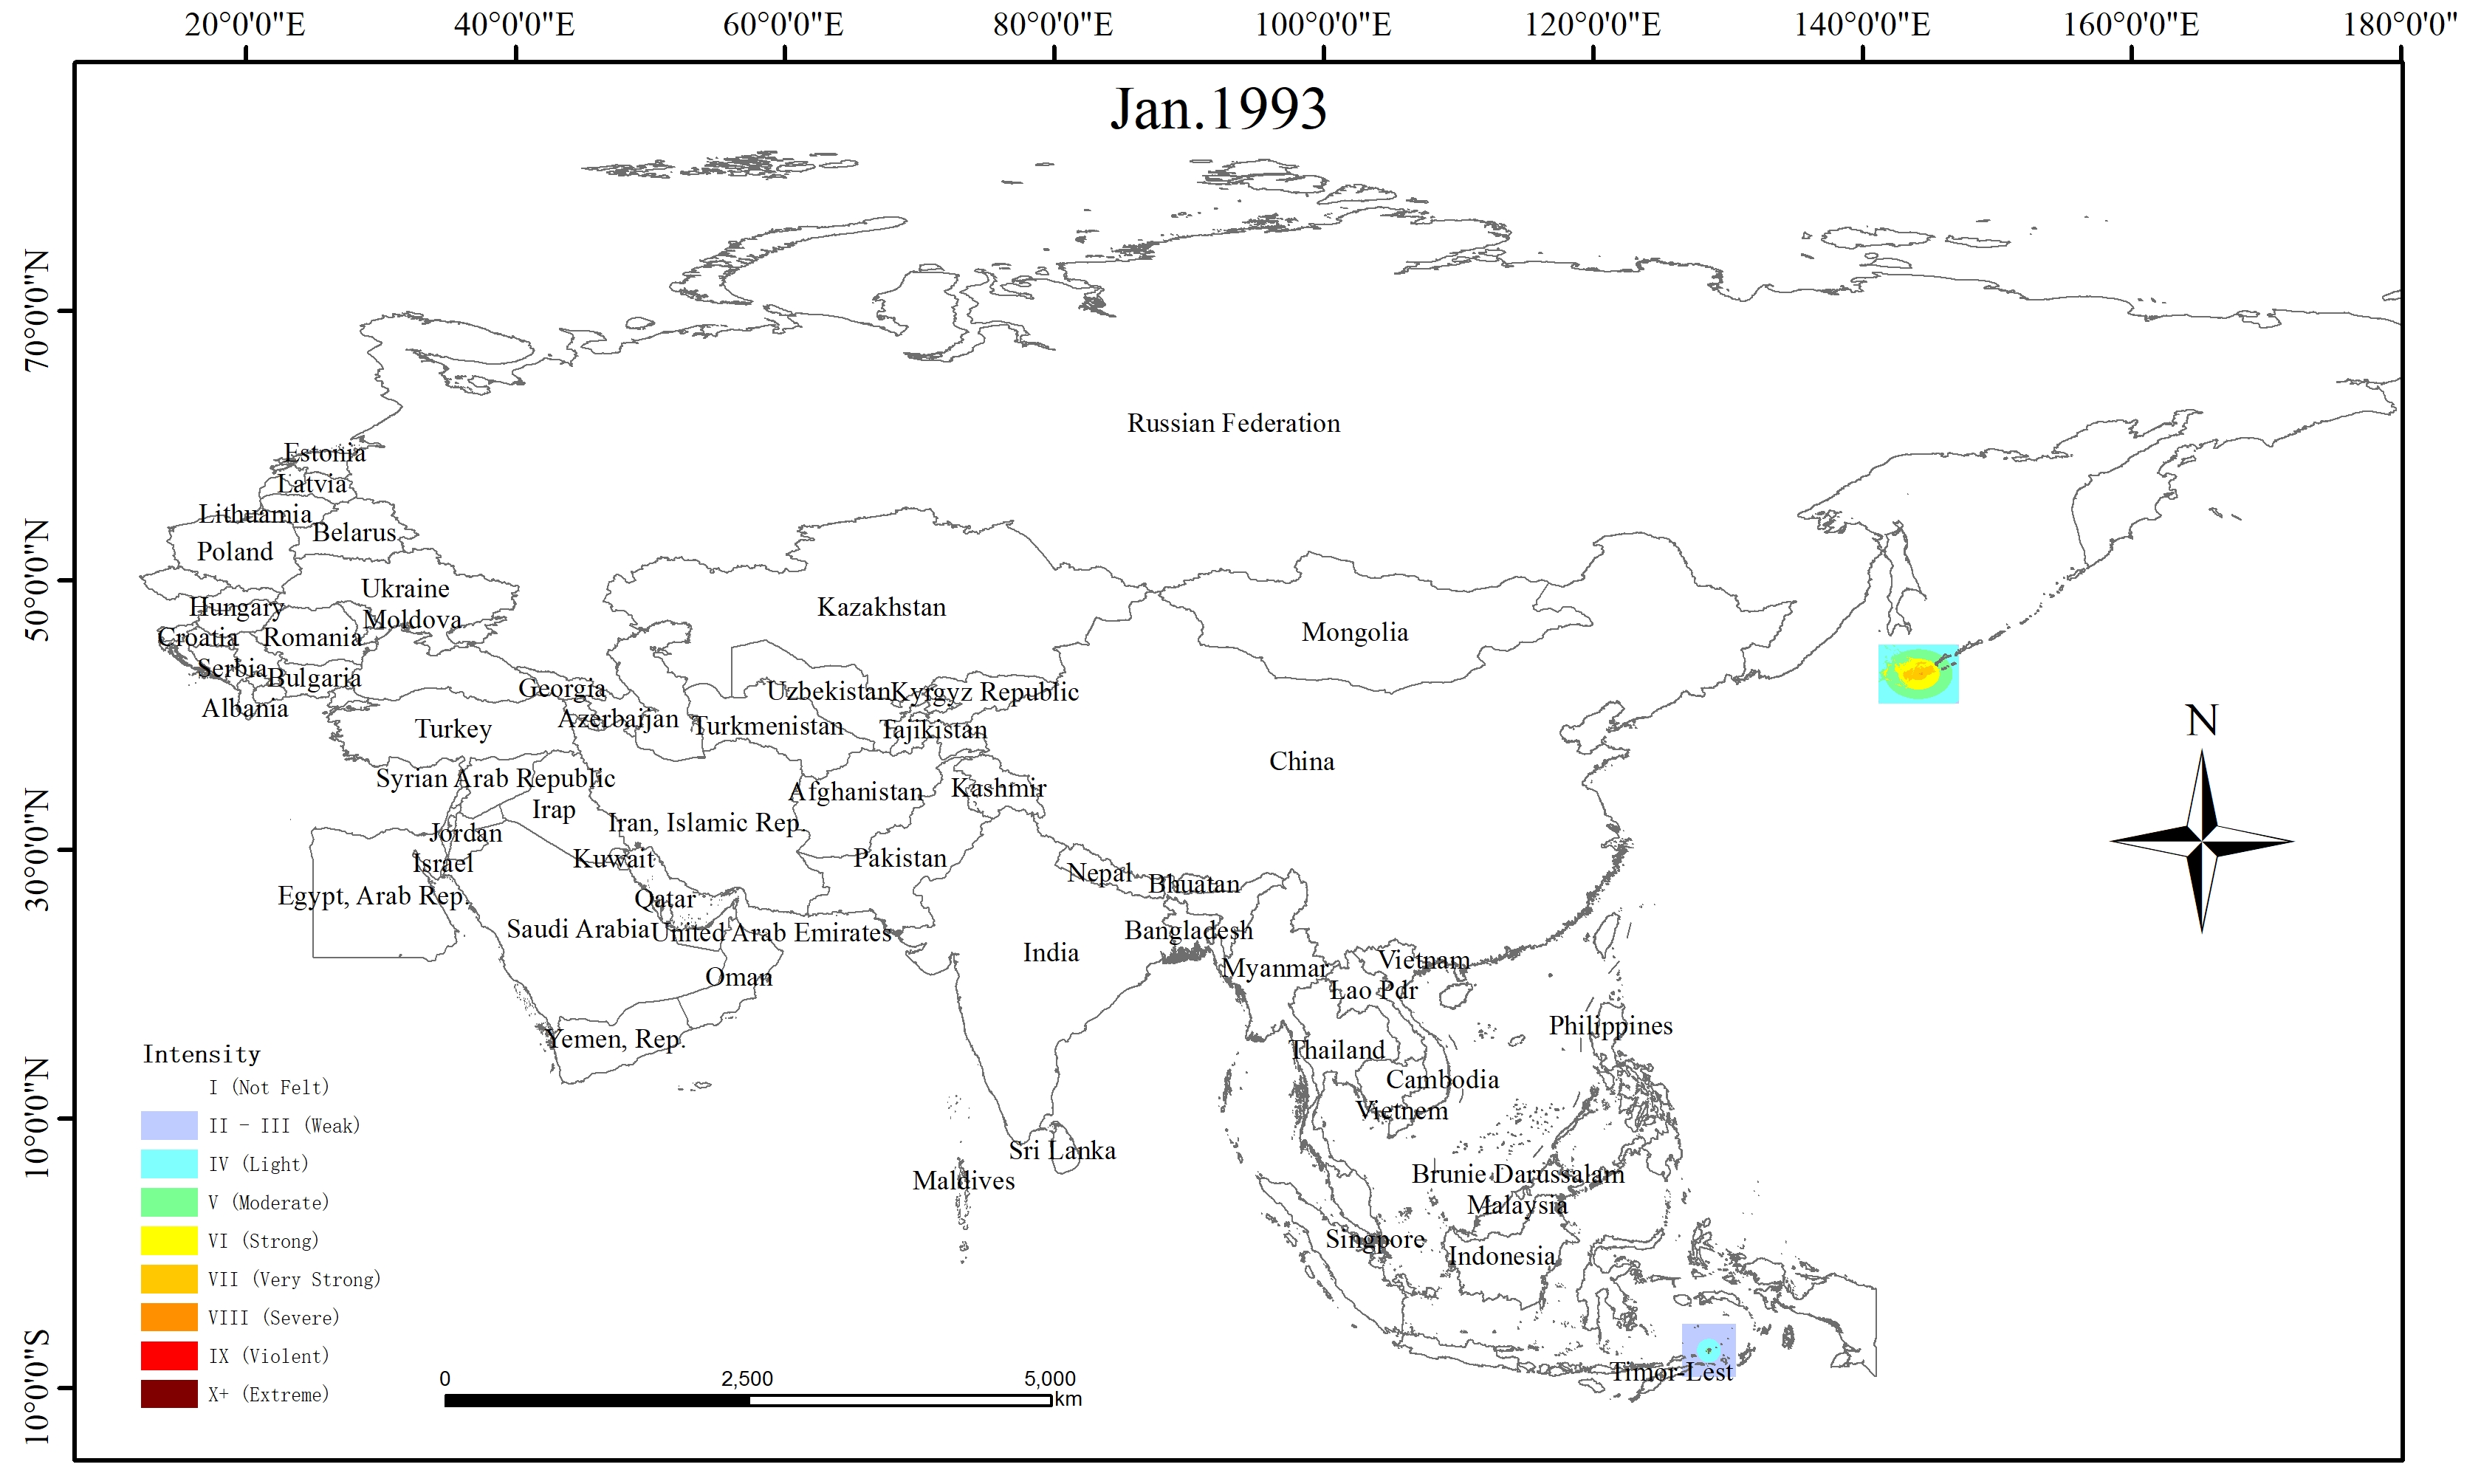 Spatio-temporal Distribution of Earthquake Disaster in the Belt and Road Area in 1993